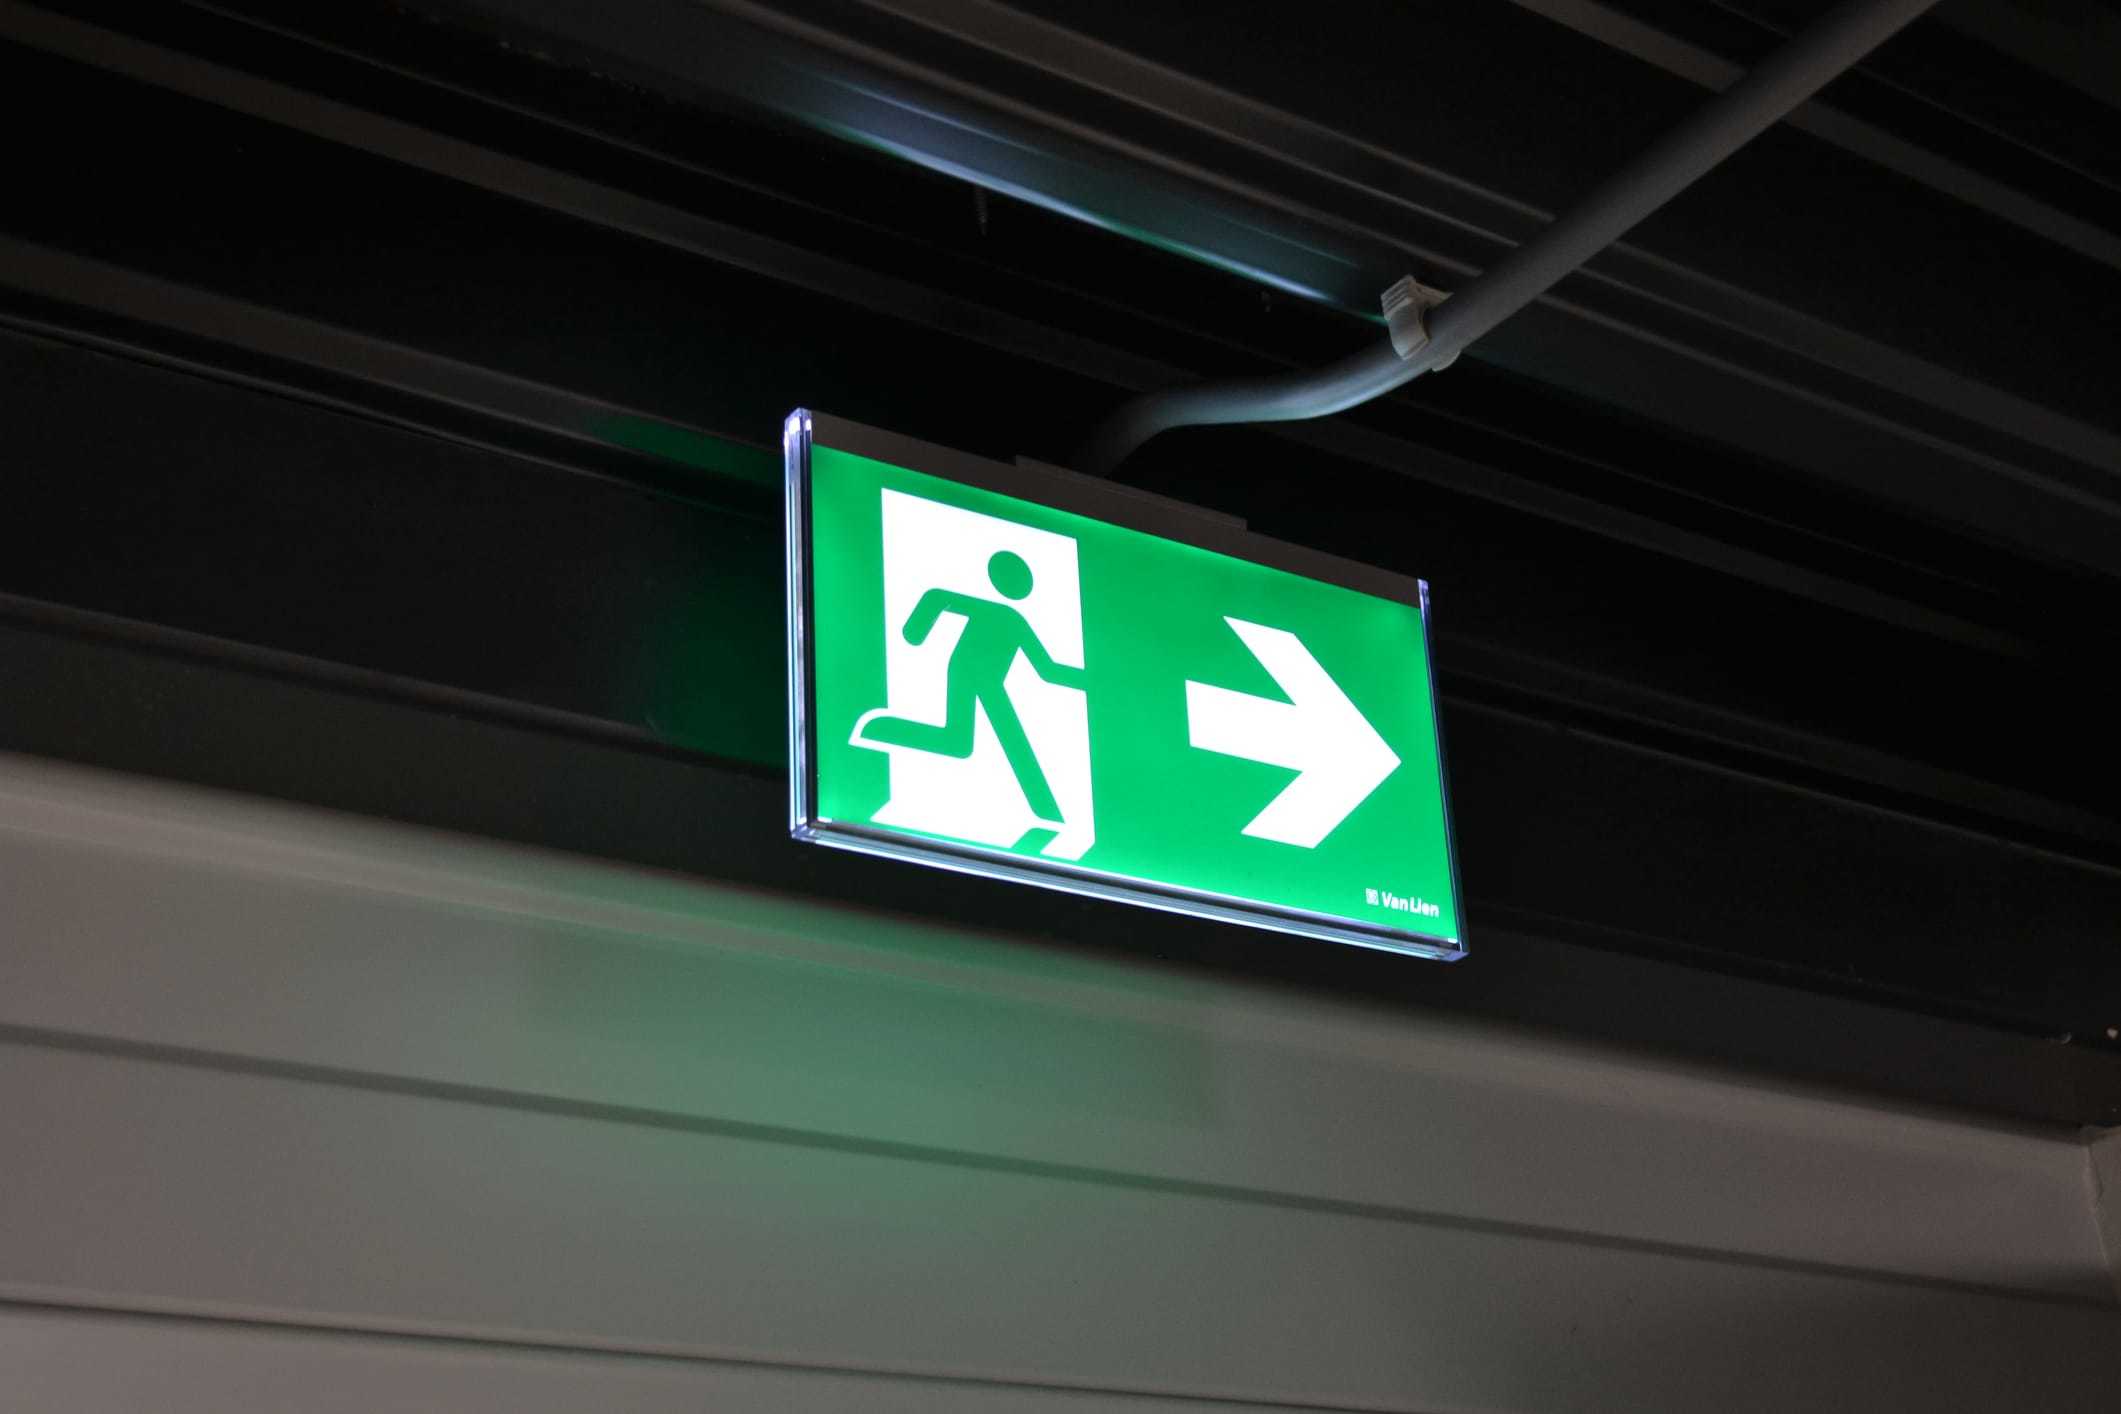 Basic knowledge about fire emergency evacuation lights